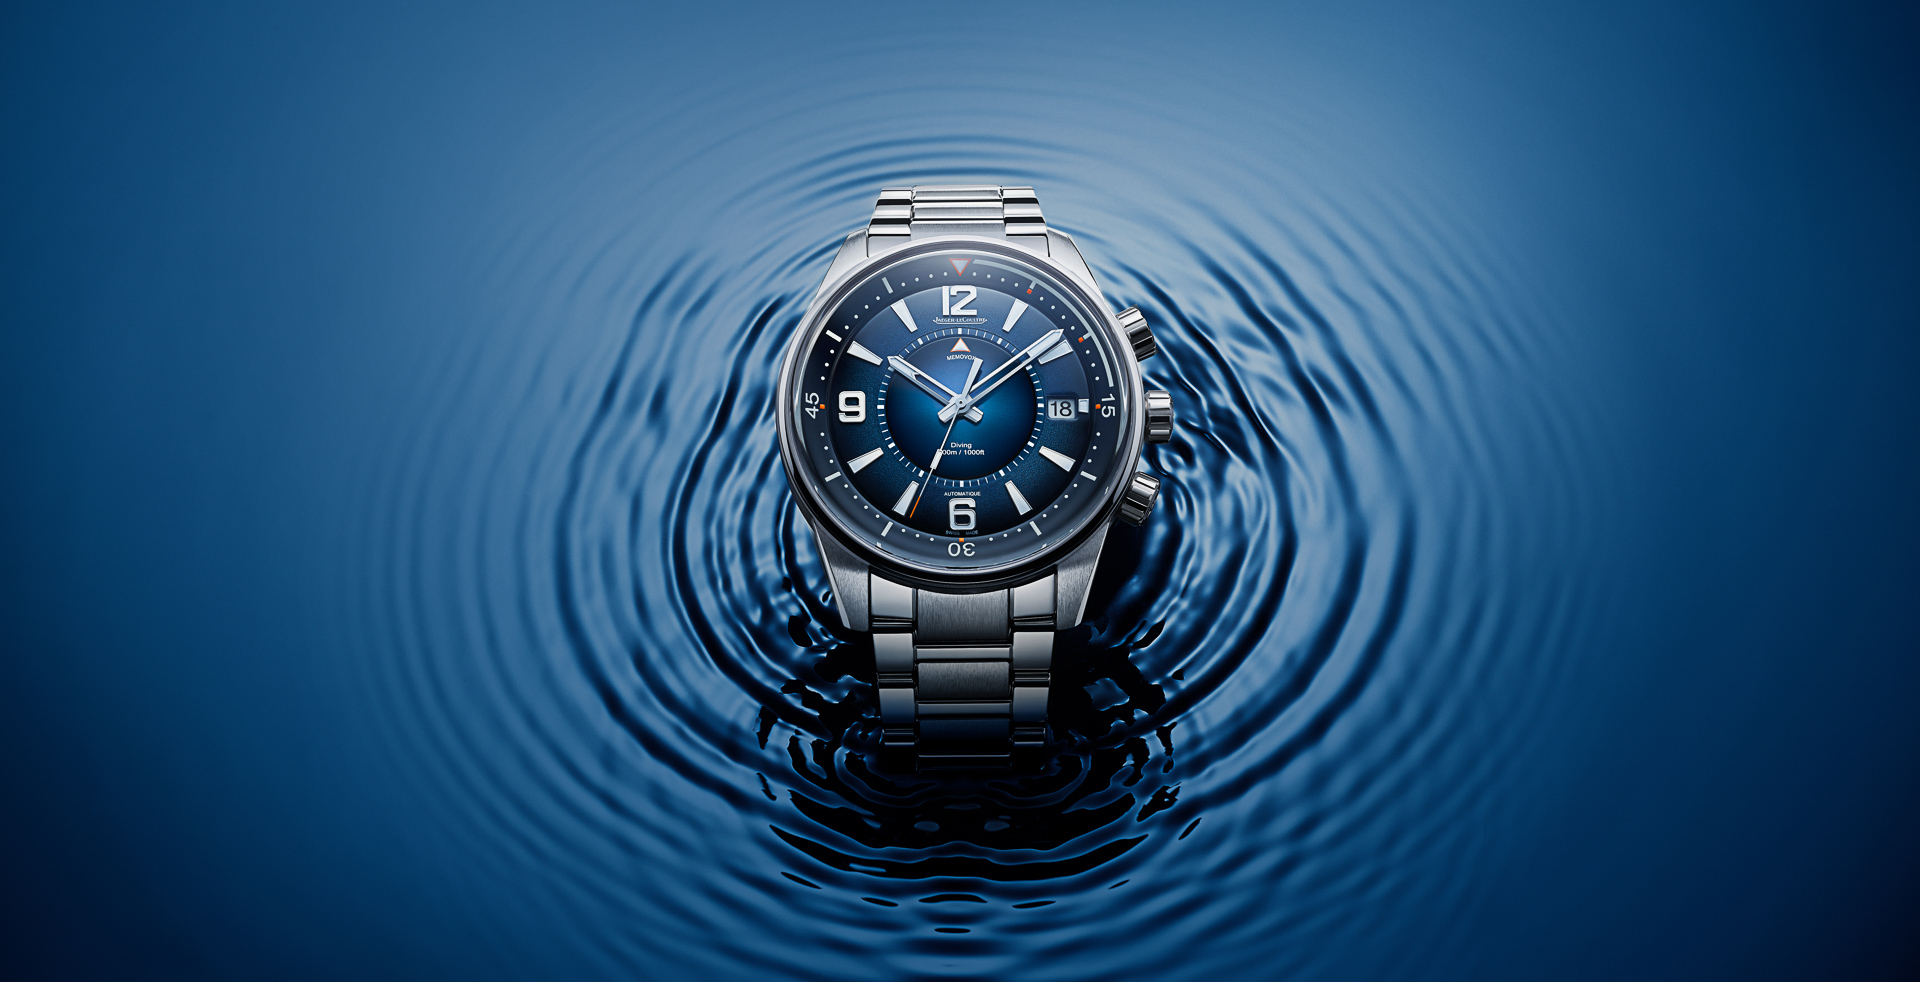 Jaeger-LeCoultre Introduces The Polaris Mariner: A Pair Of Serious ISO 6425-Rated Dive Watches